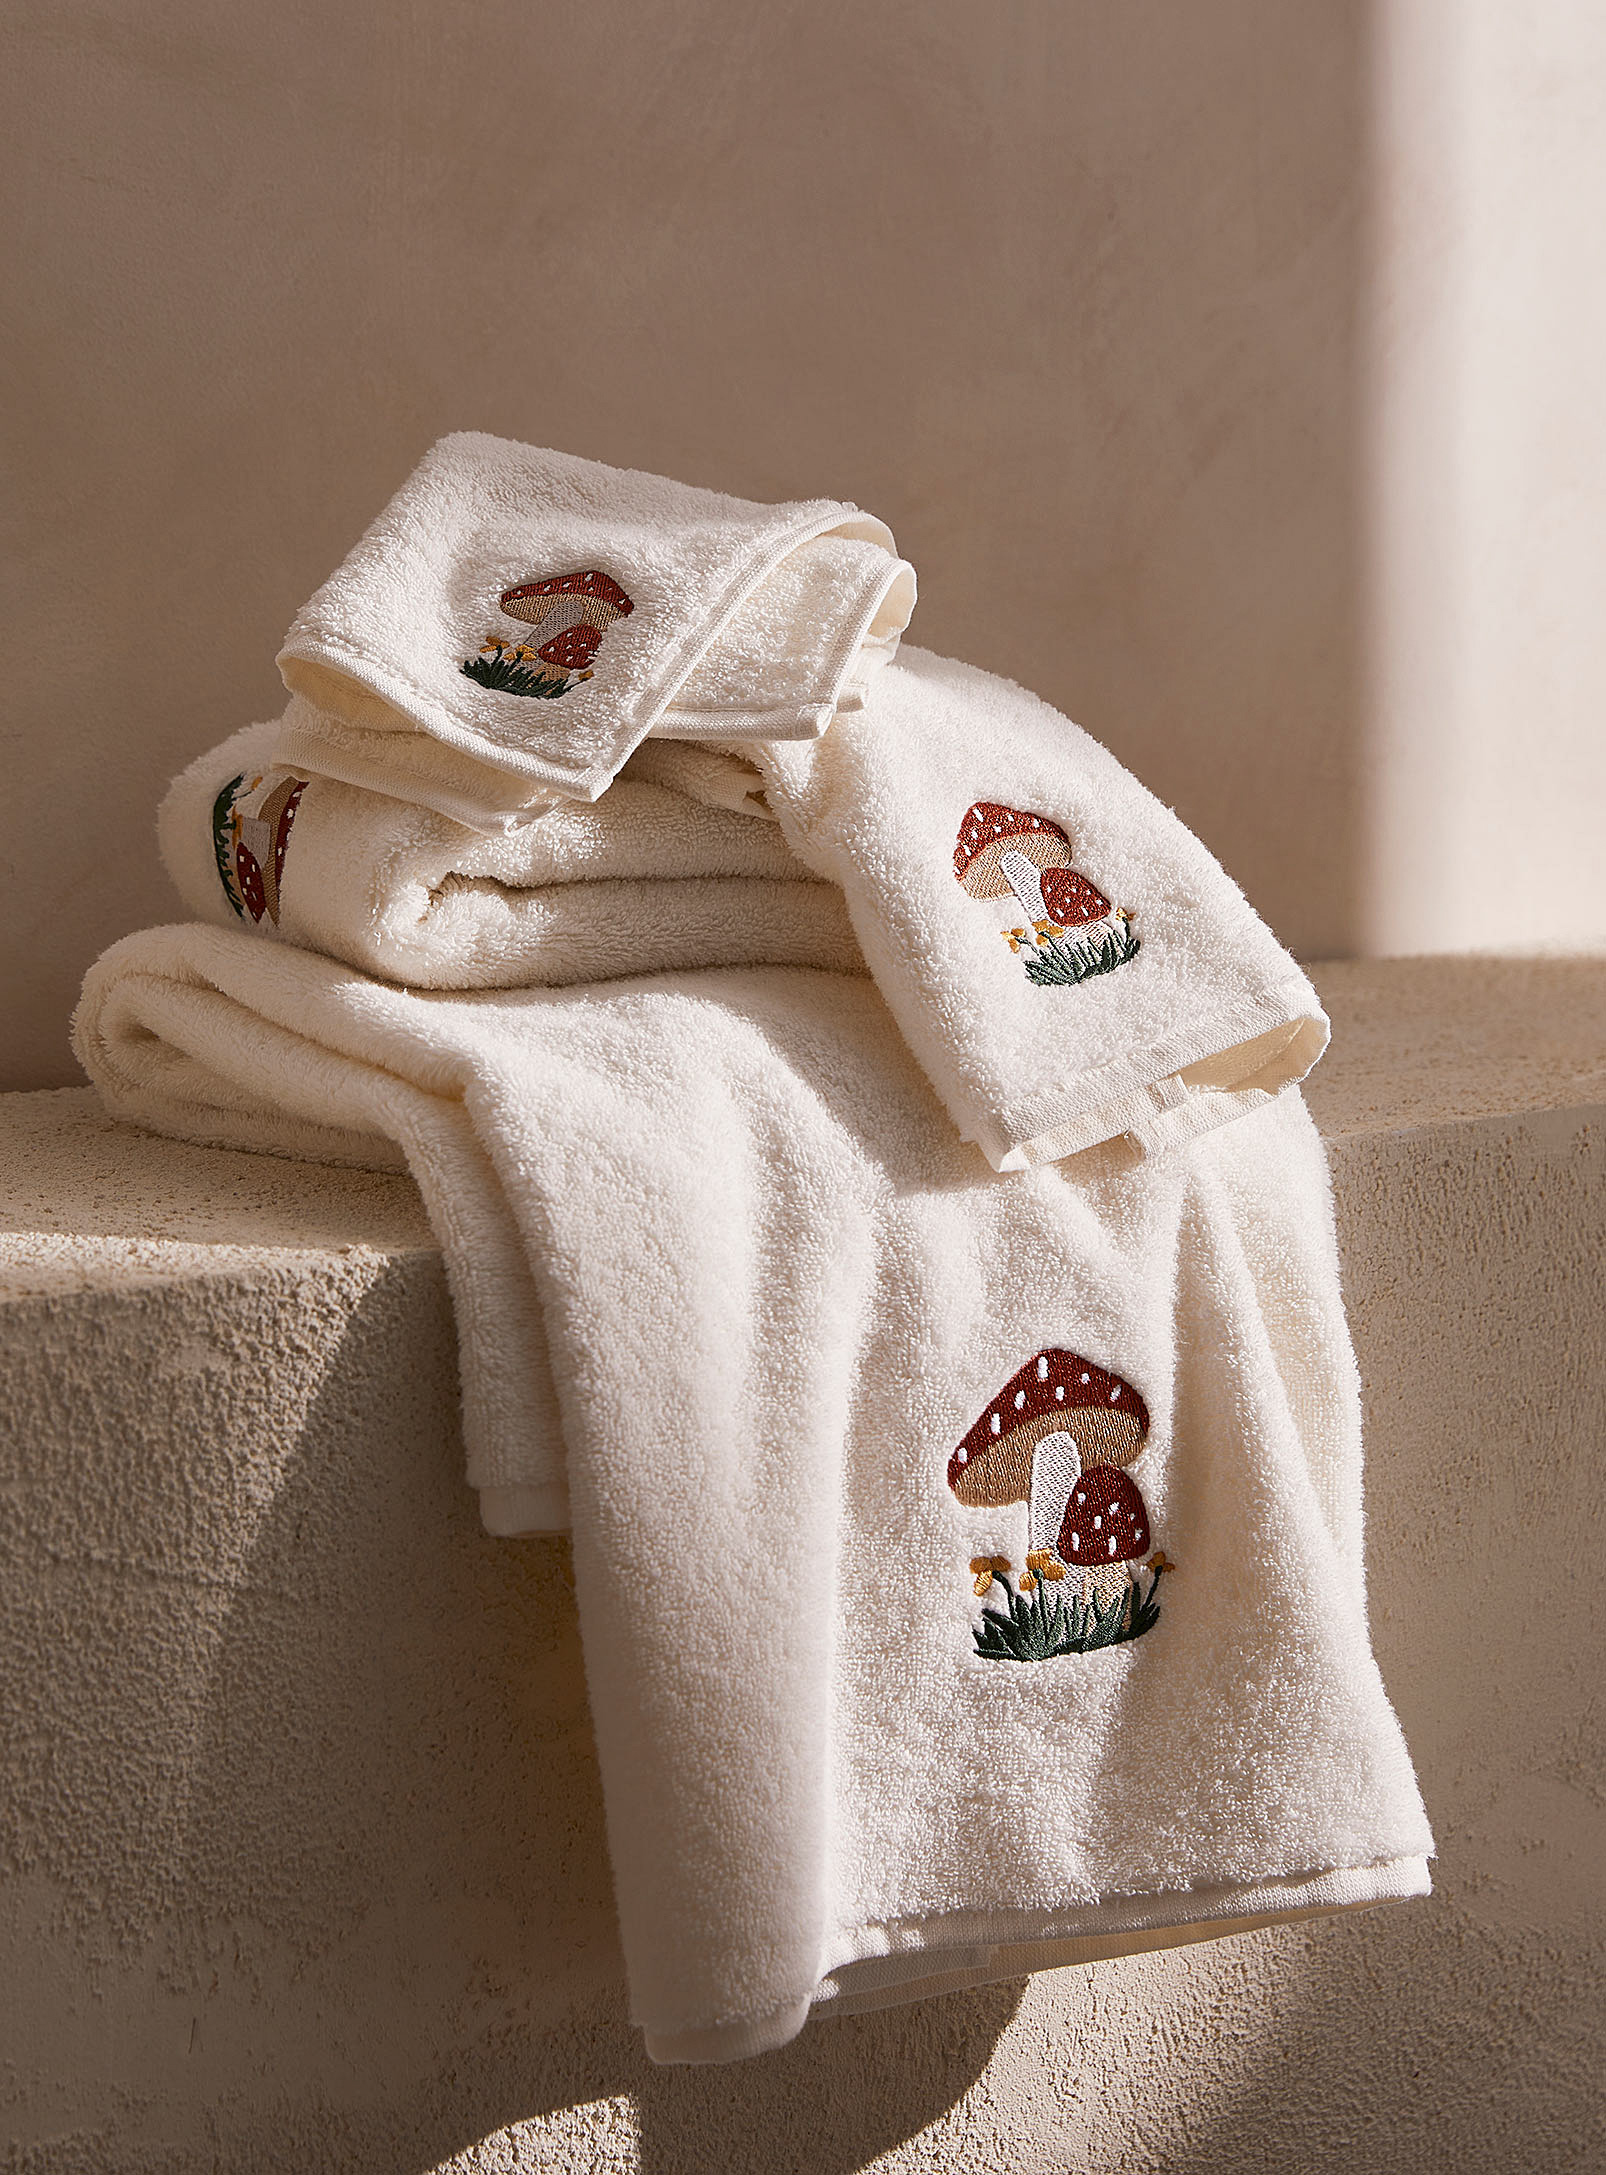 Simons Maison Wild Mushrooms Turkish Cotton Towels In Patterned White